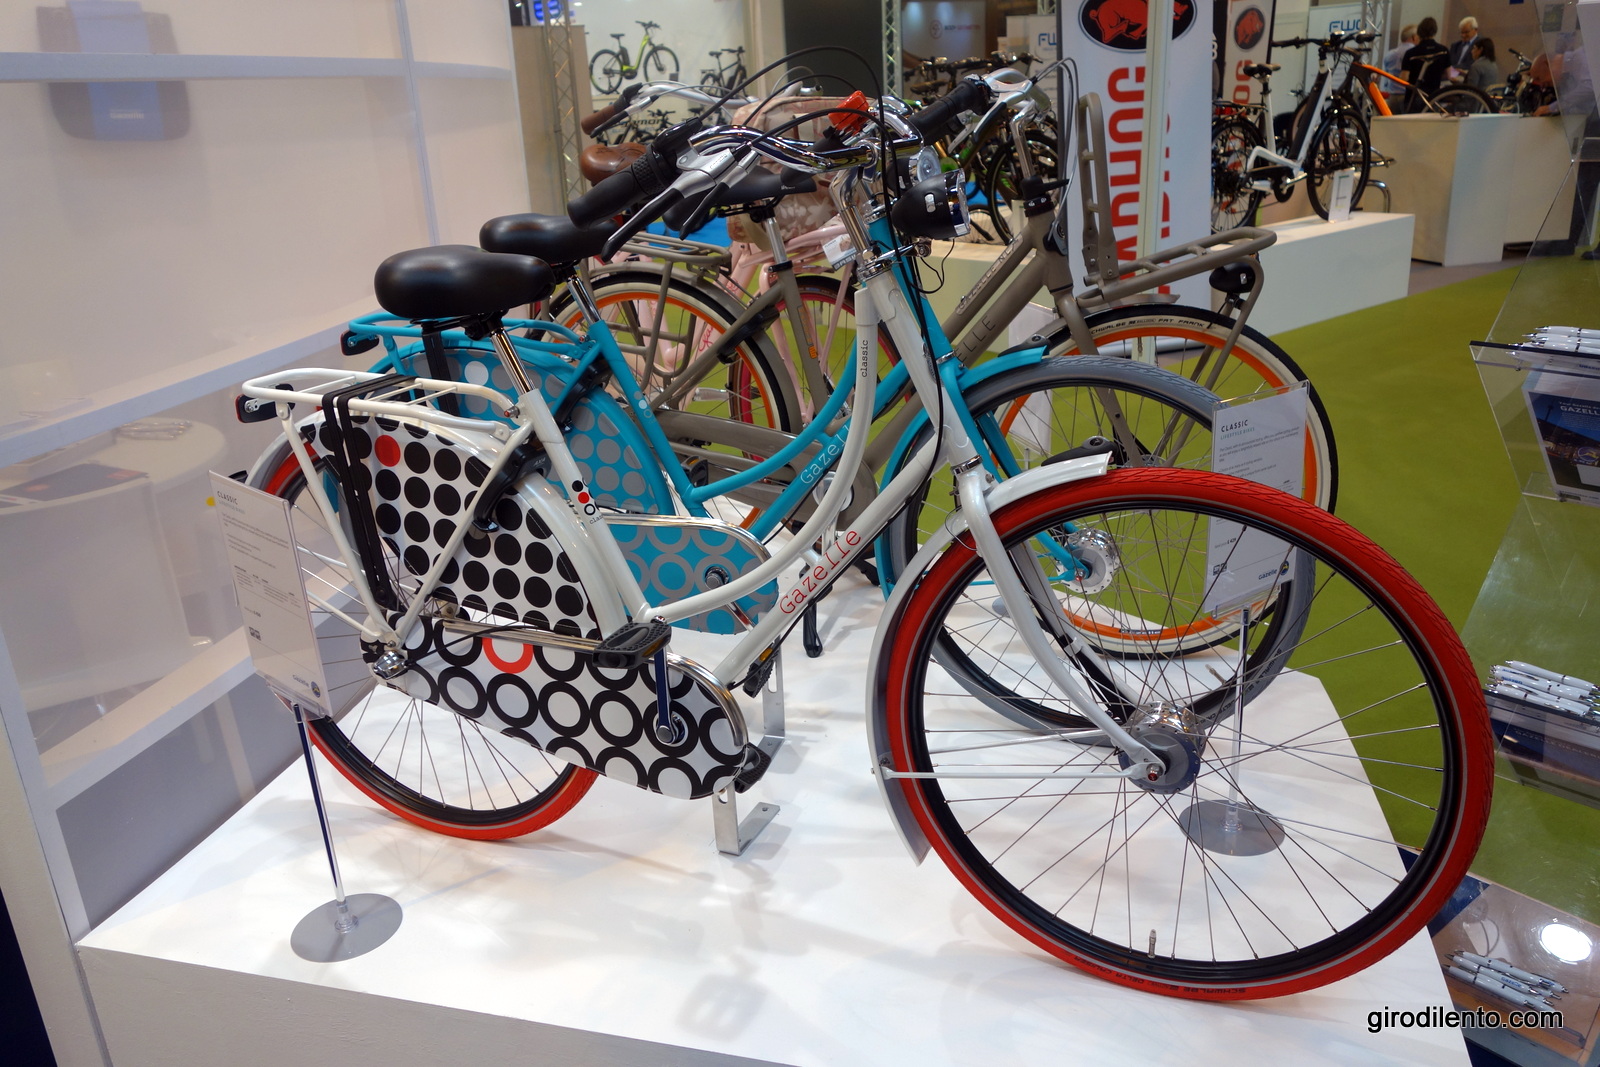 Classic Dutch town bikes from Gazelle - very cool